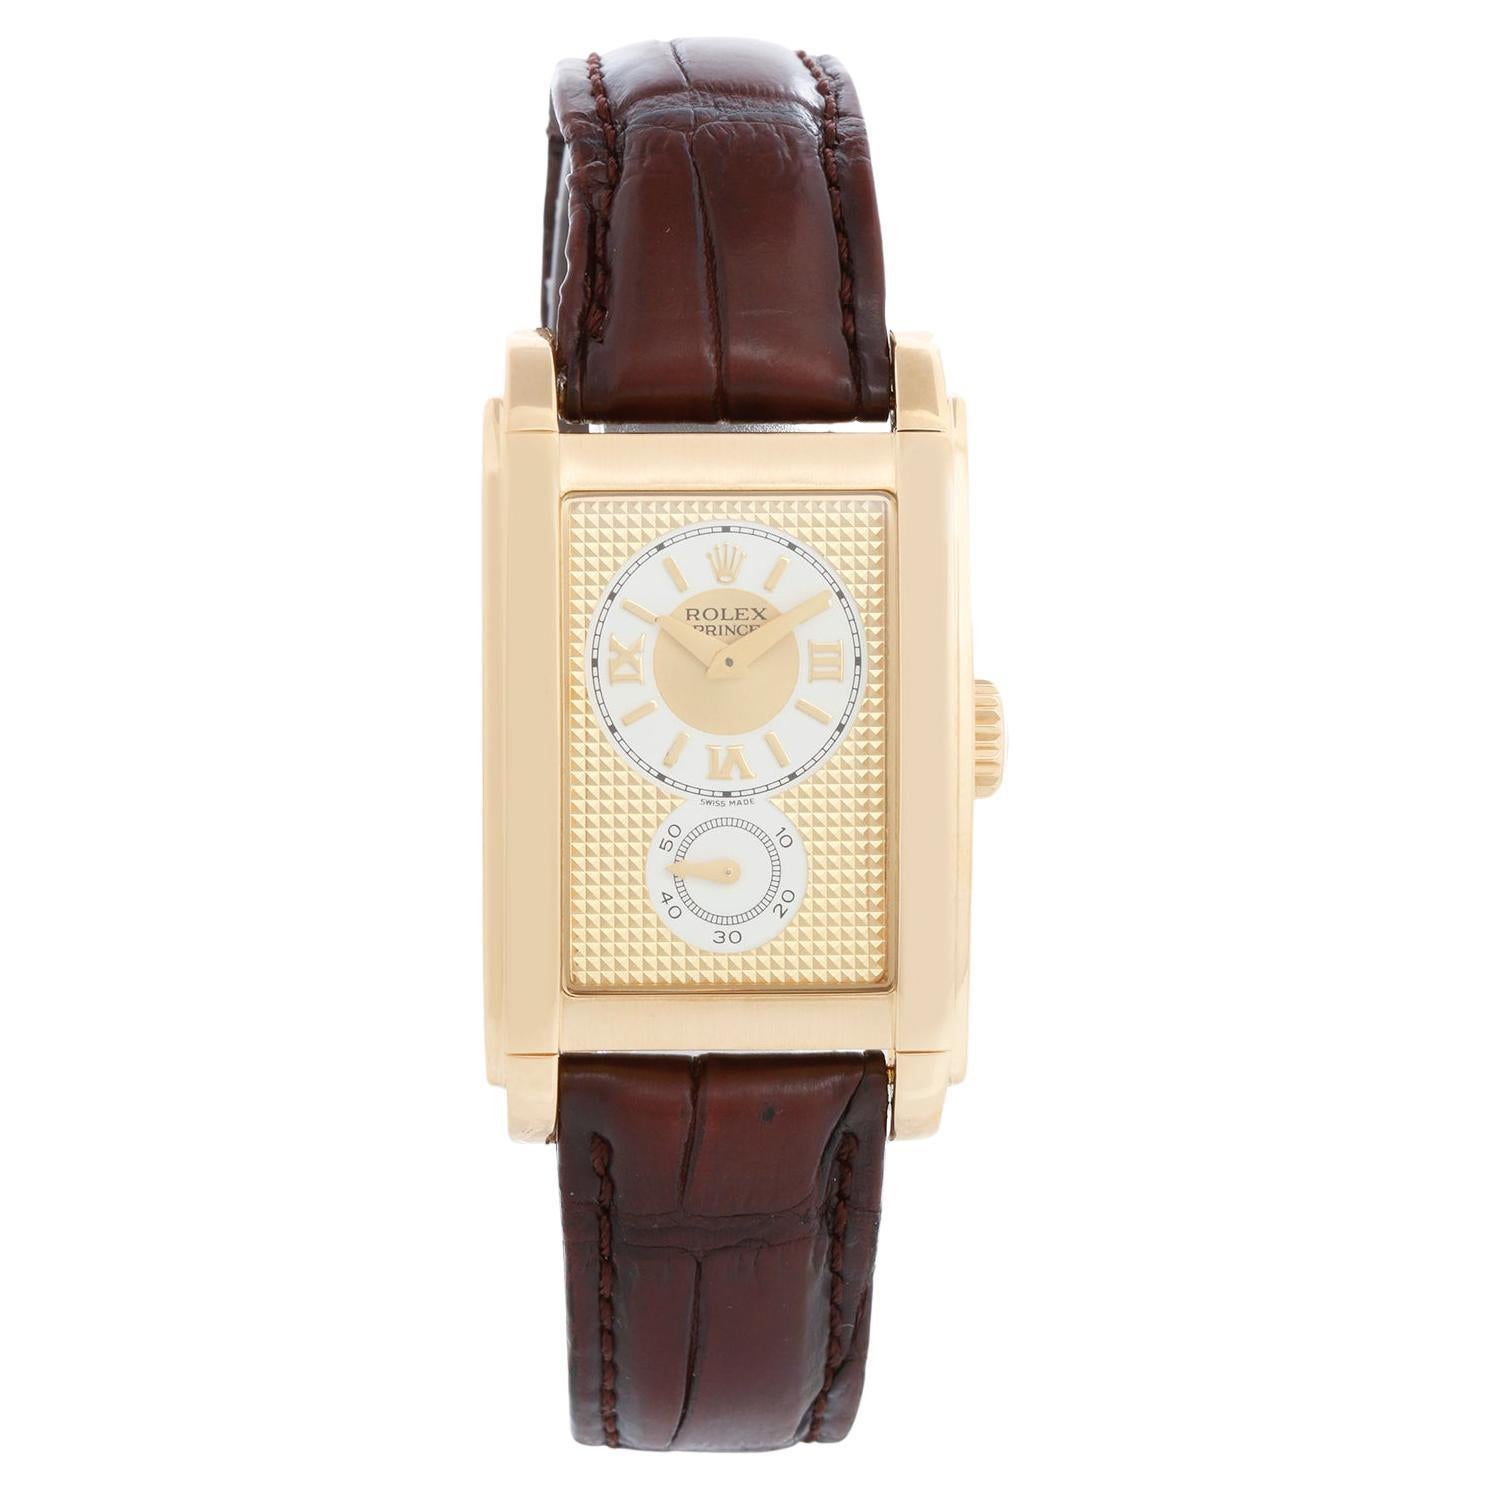 Rolex Prince Cellini Men's 18k Yellow Gold Watch 5440/8 For Sale